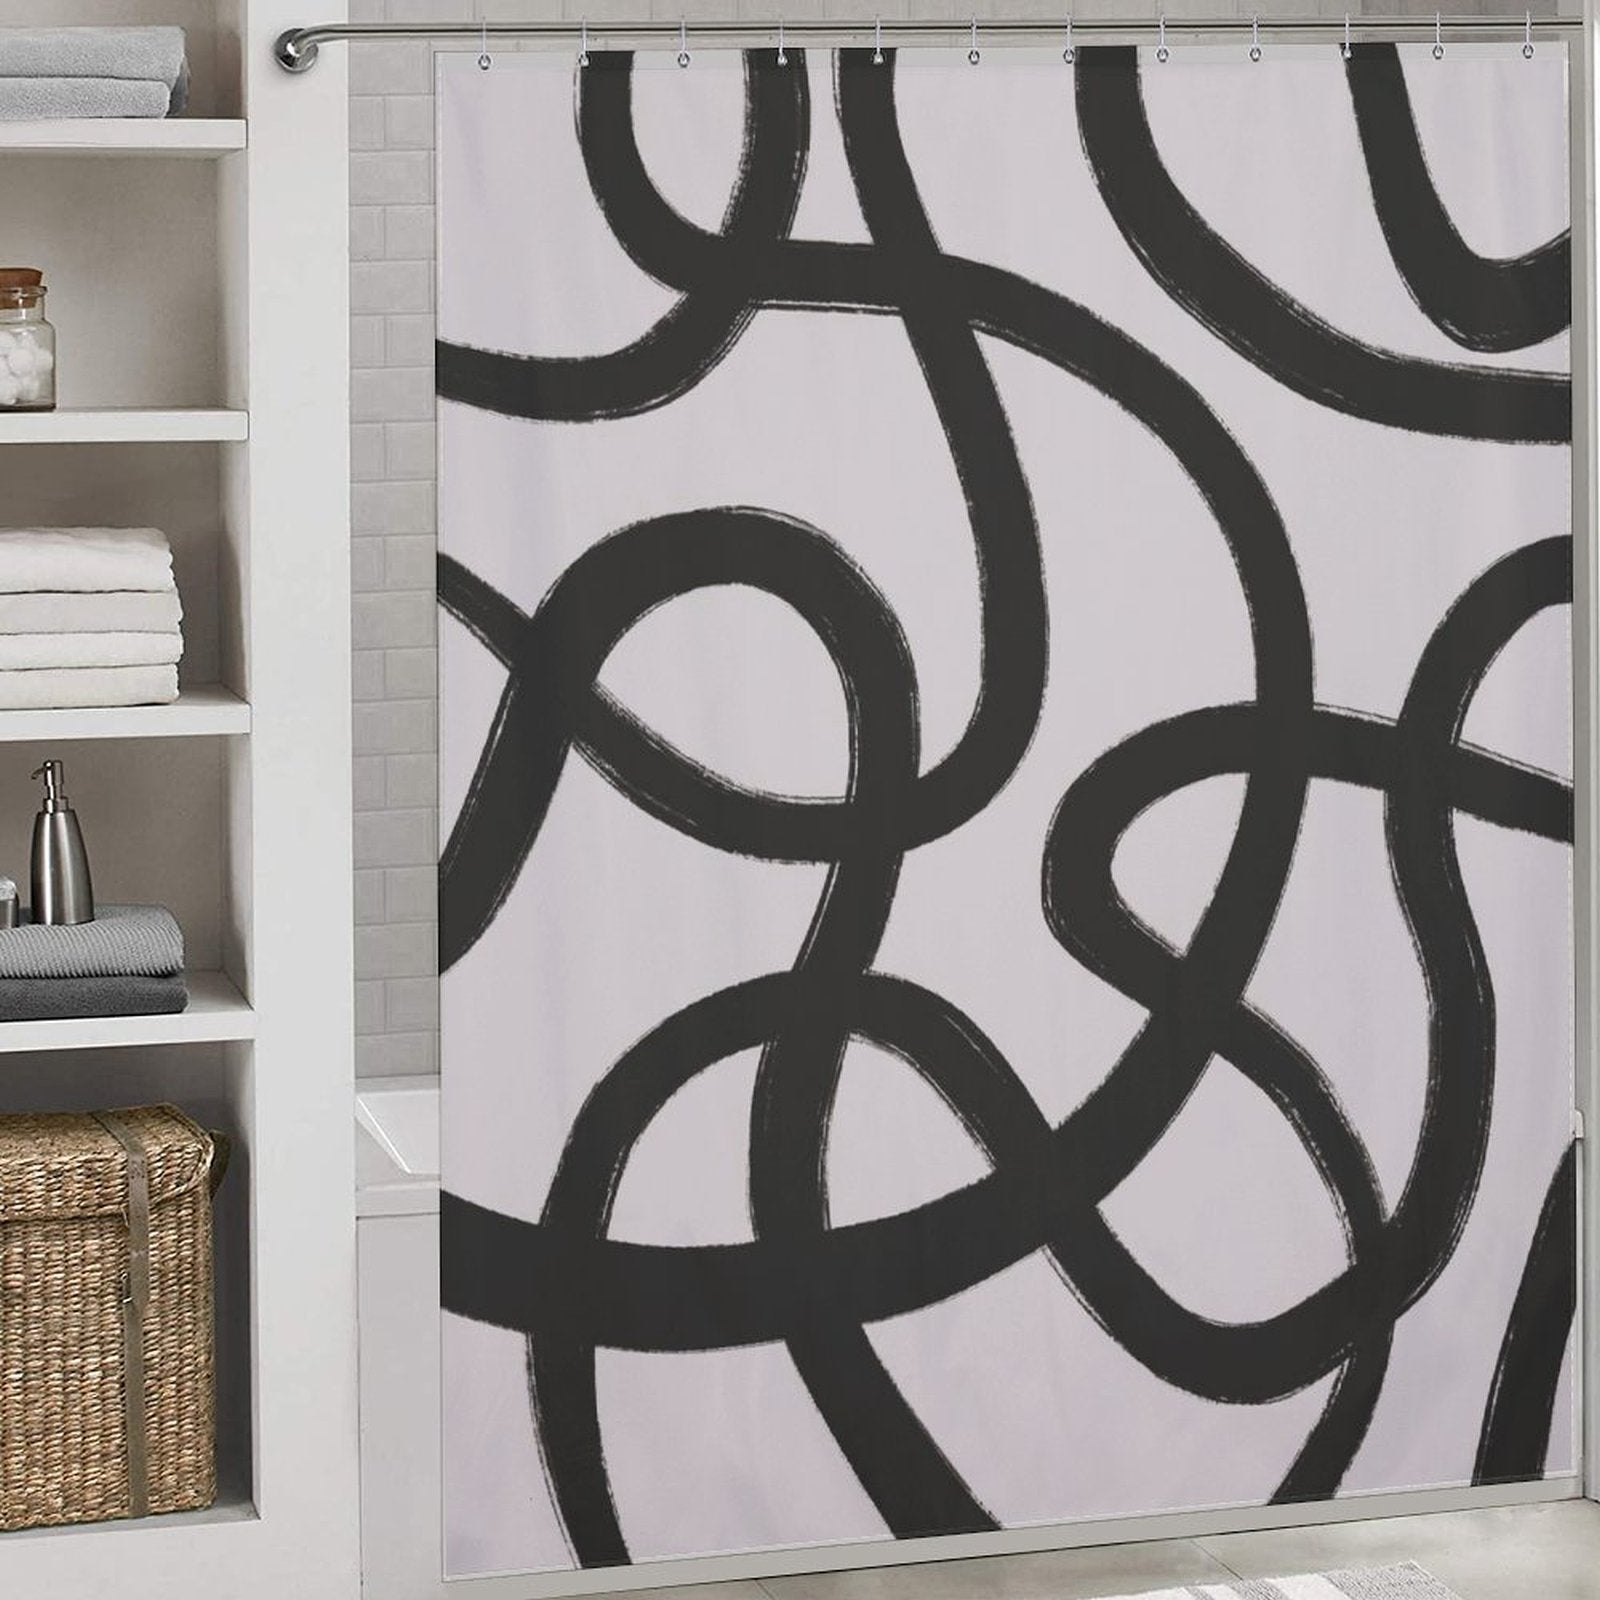 A bathroom scene with a Modern Geometric Art Minimalist Curve Black Line Black and Grey Abstract Shower Curtain-Cottoncat by Cotton Cat featuring a white background and large, minimalist black curve lines. To the left, there are shelves holding folded towels and two small jars. A wicker basket is below.